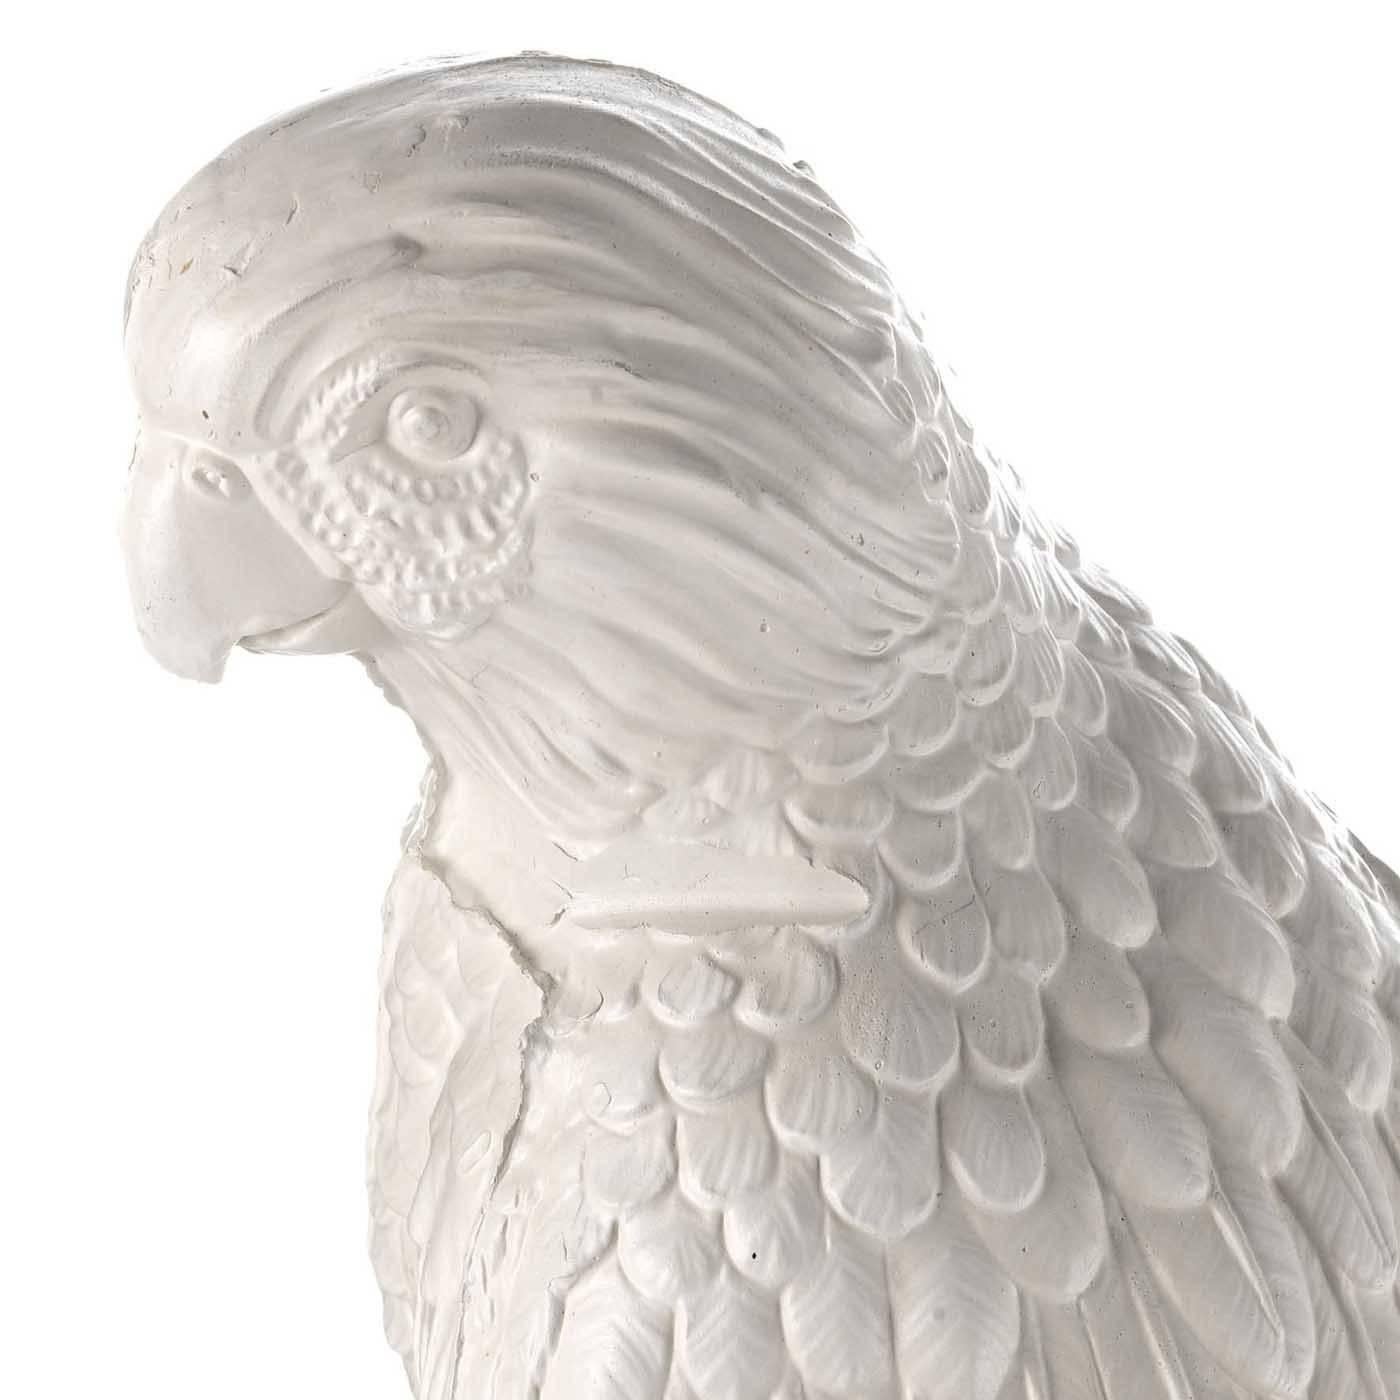 This playful parrot was entirely made in ceramic using artisanal methods that feature a mold that is manually filled with liquid clay to obtain the life-like features of the bird and the details of its plumage and head. The parrot is perched on a